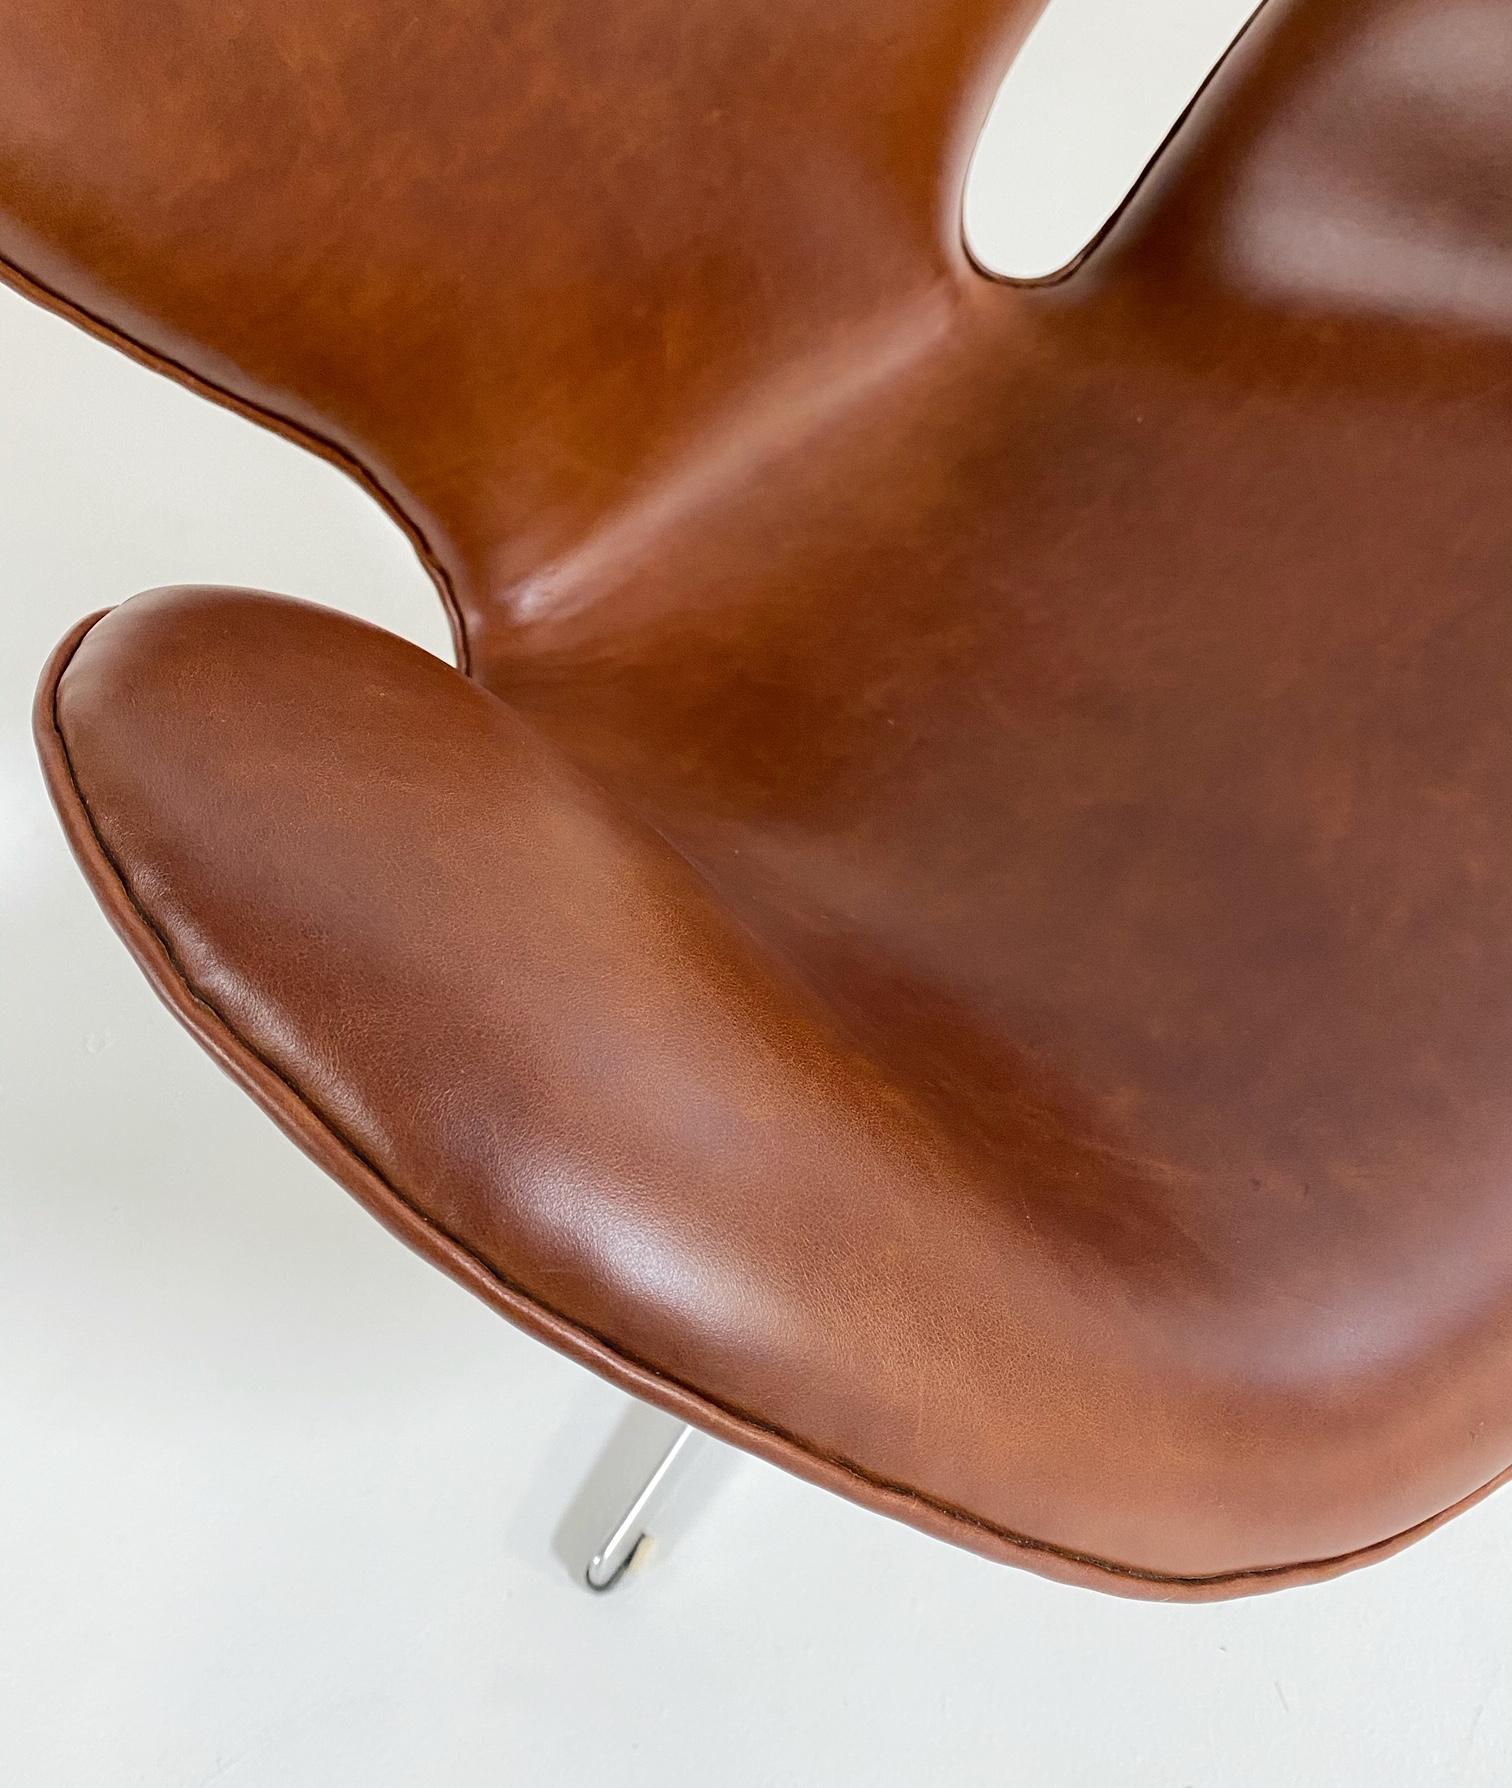 Mid-20th Century Arne Jacobsen Swan Chair in Leather